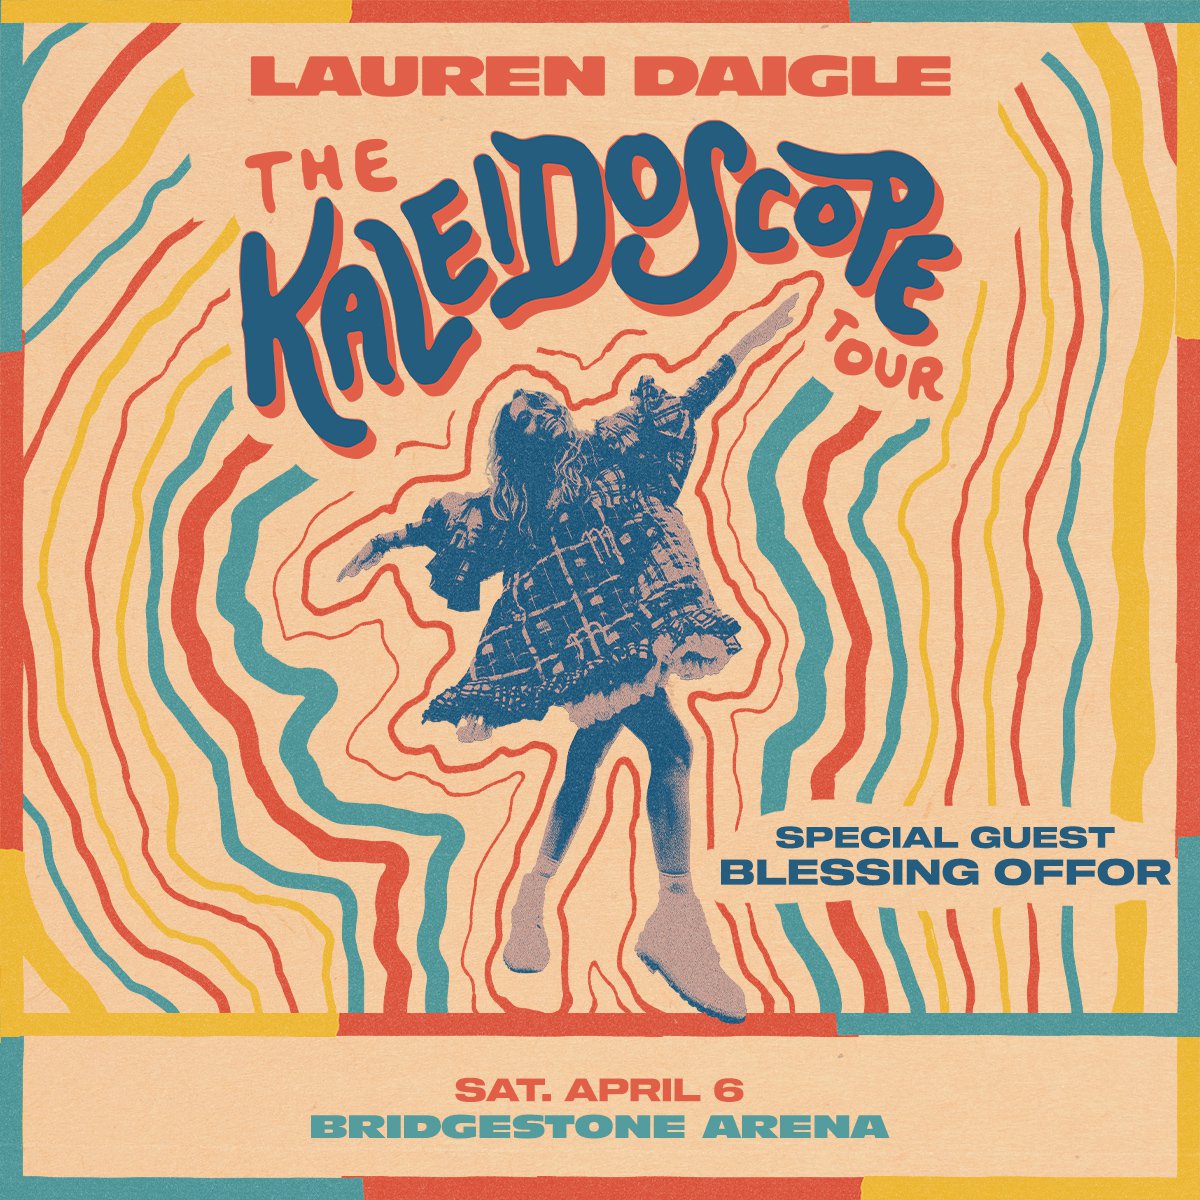 Lauren Daigle The Kaleidoscope Tour with special guest Blessing Offor